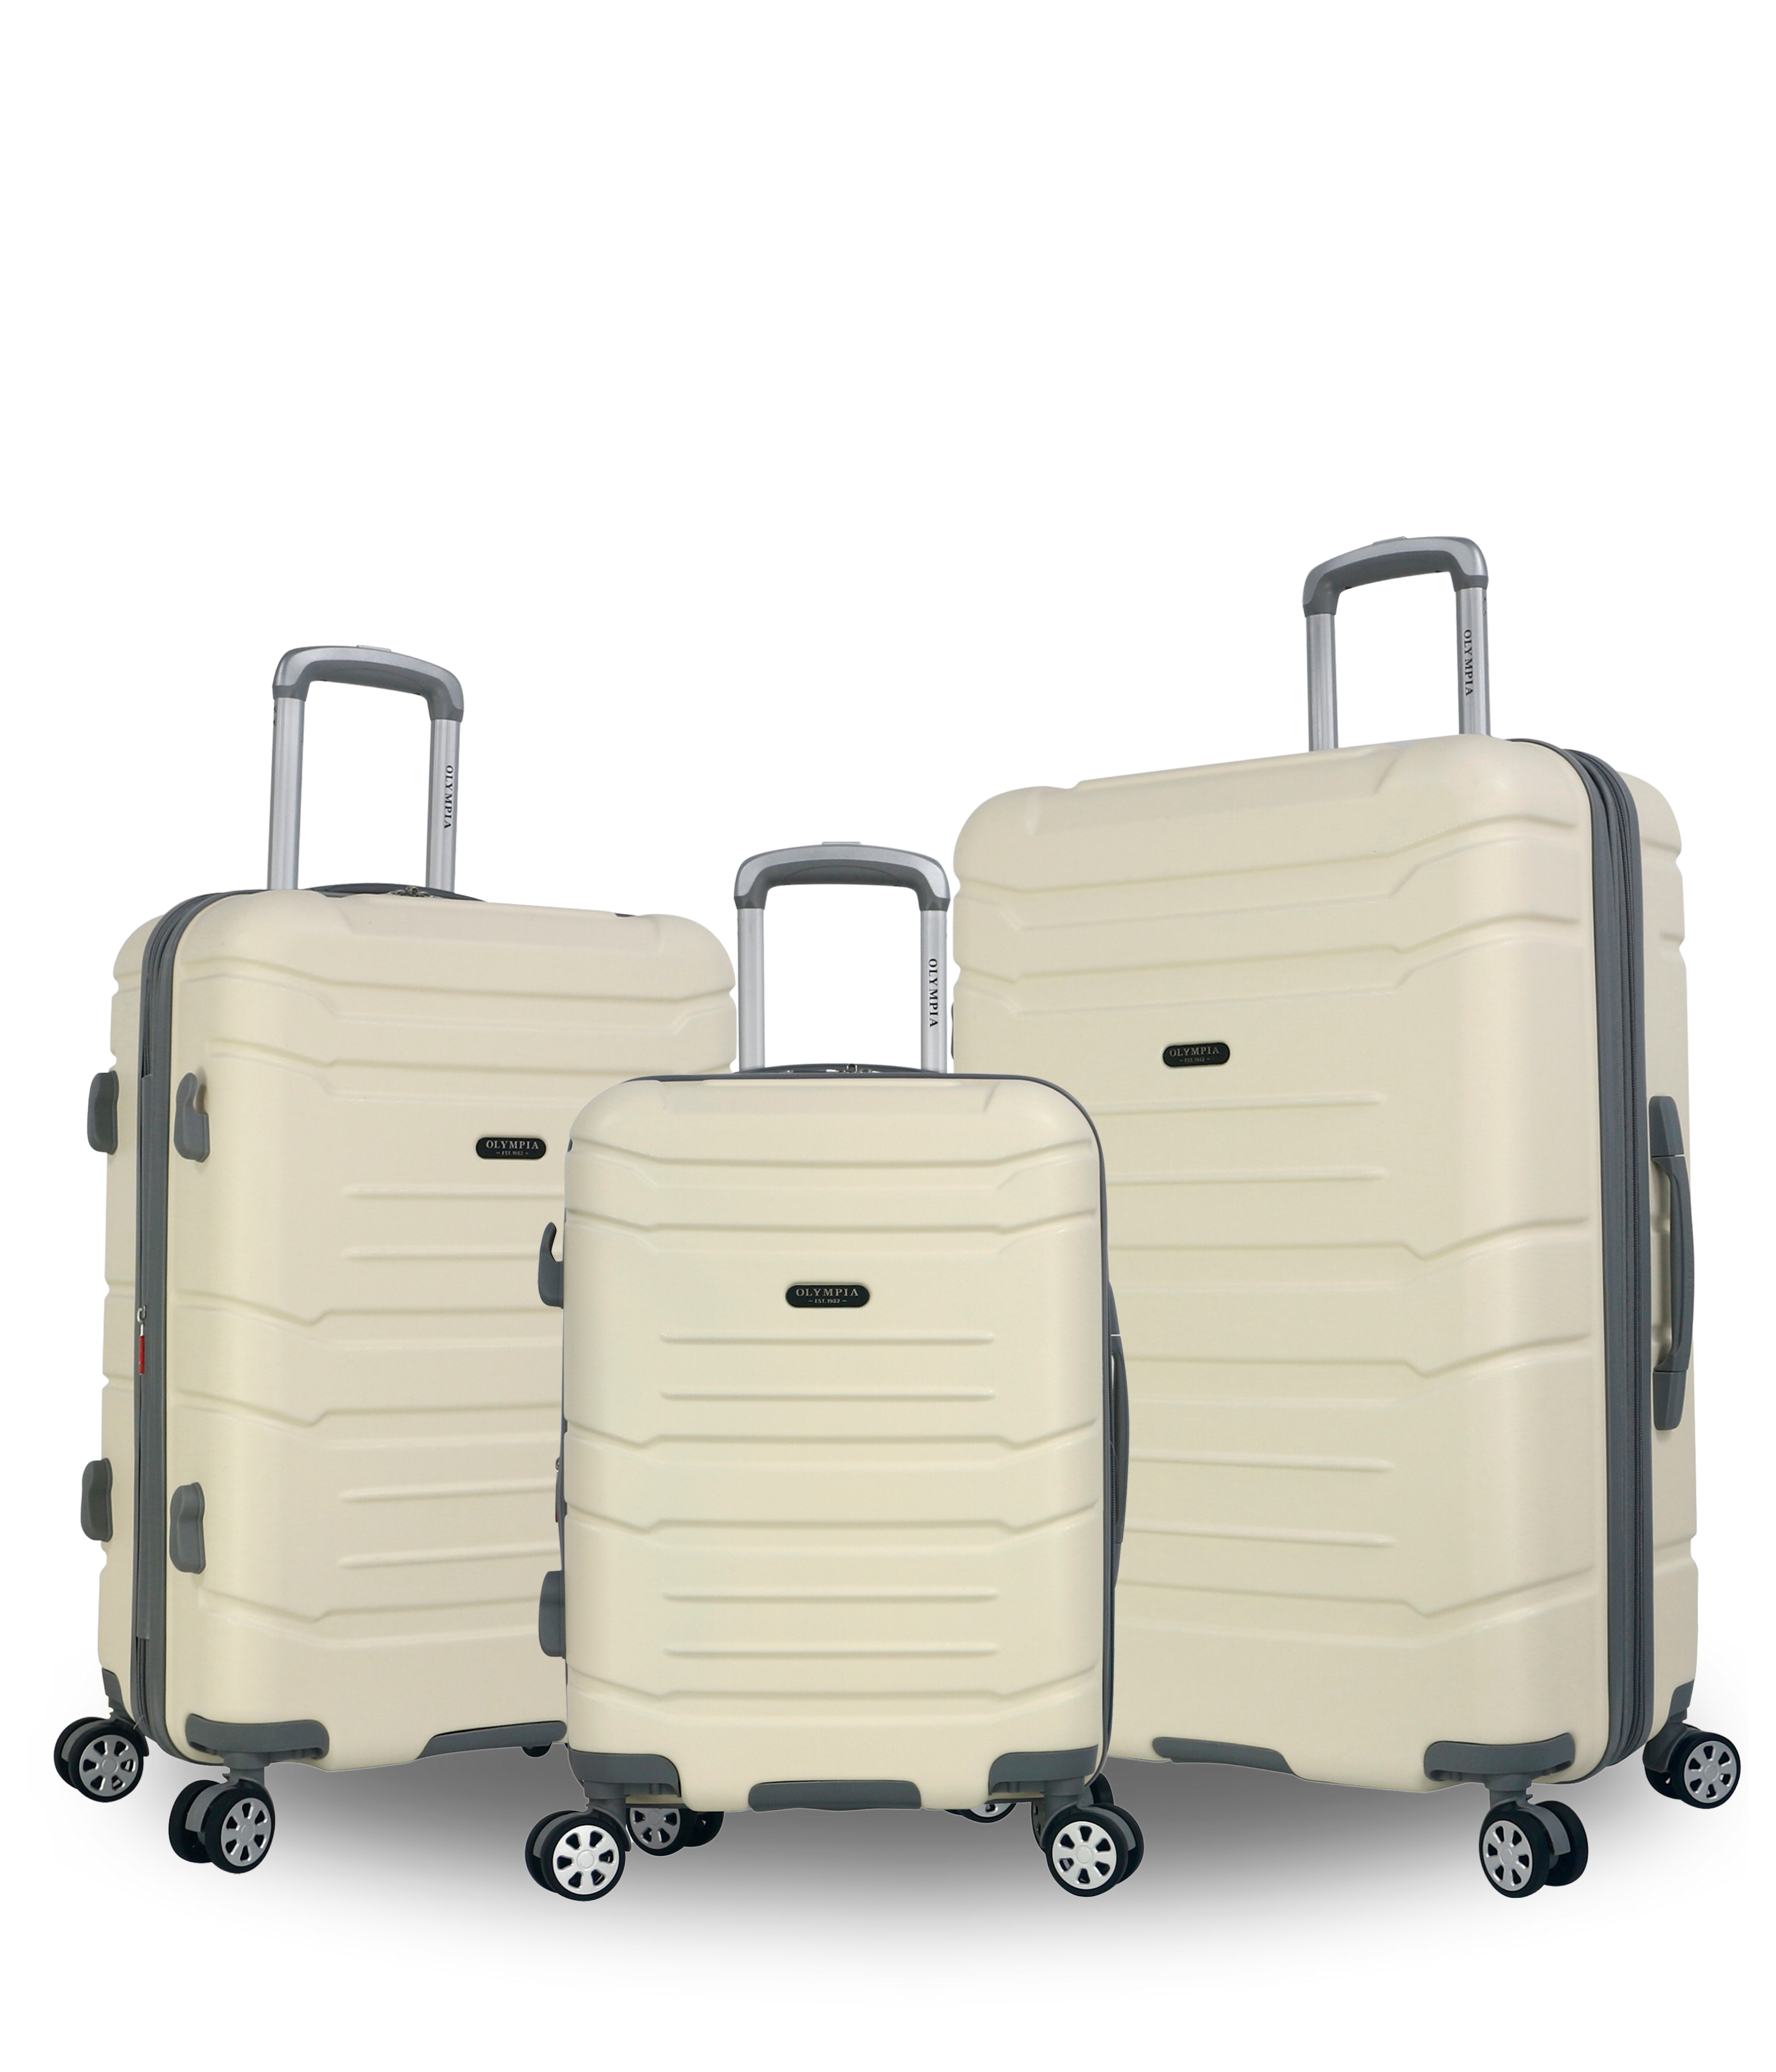 Denmark Plus Bestseller: Sturdy and Lightweight 3-PIECE SETS with Patented Guaranteed Organizational Features